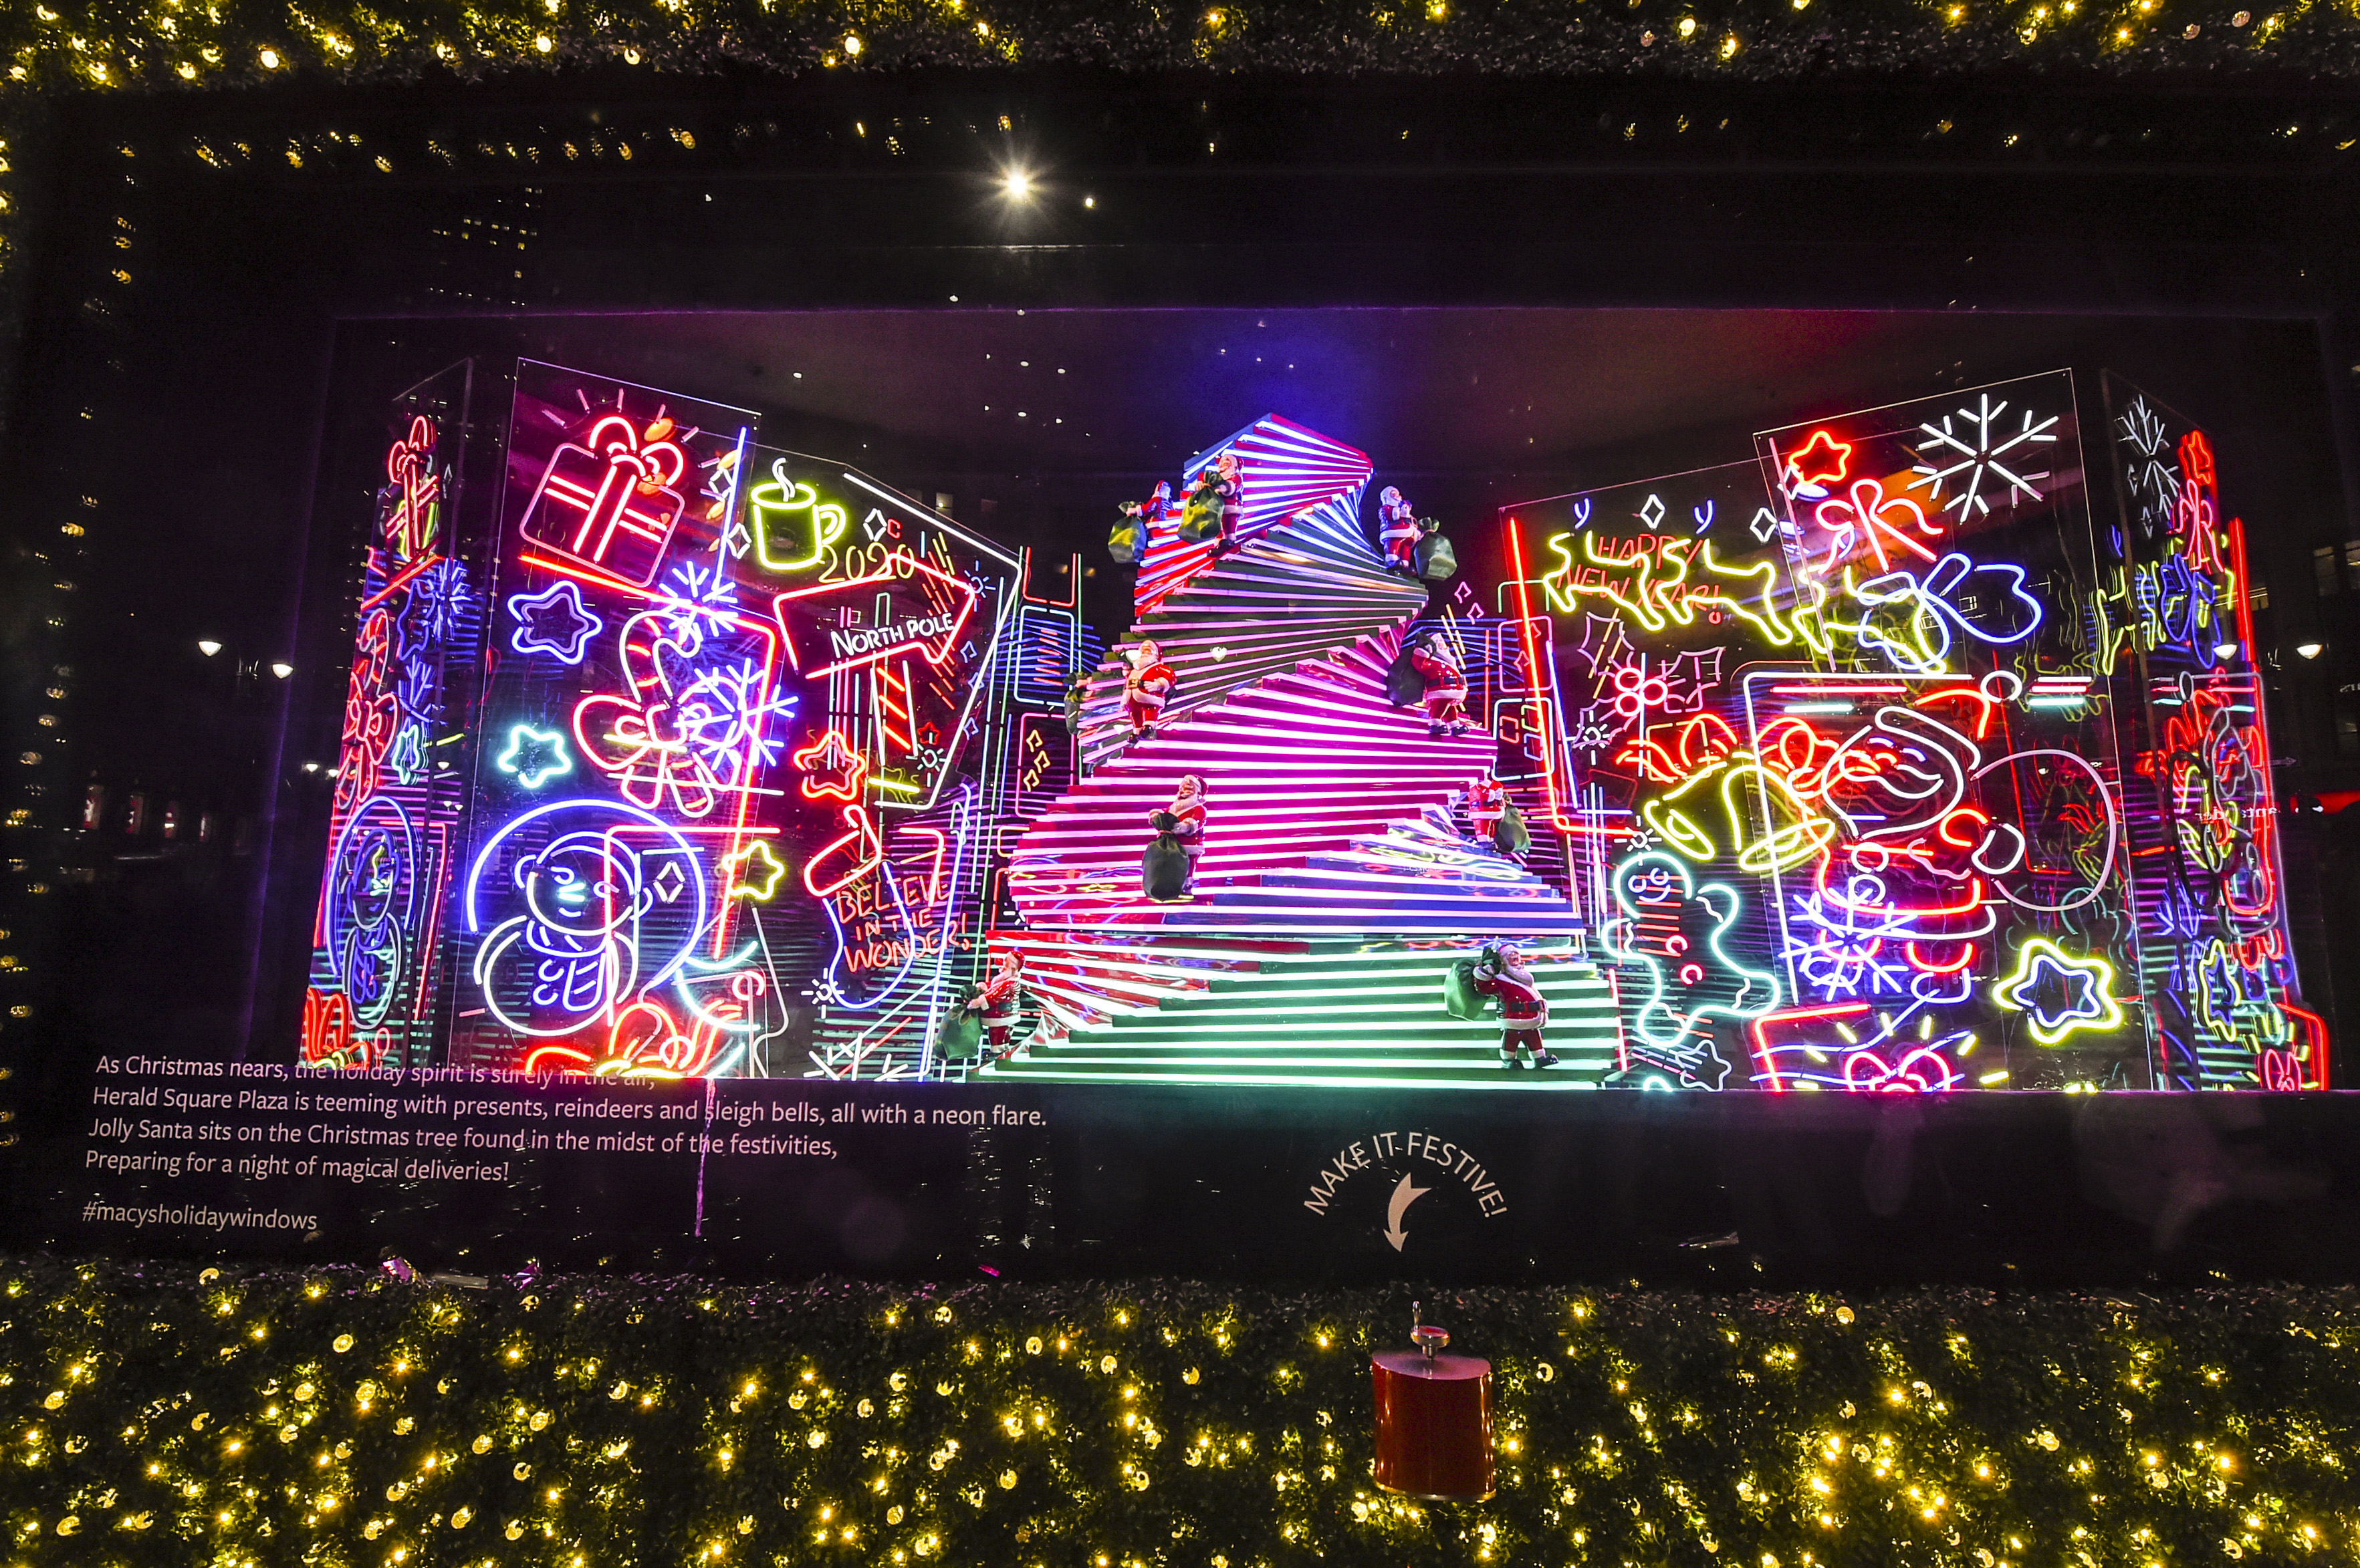 Macy's unveils its iconic holiday windows in New York City for